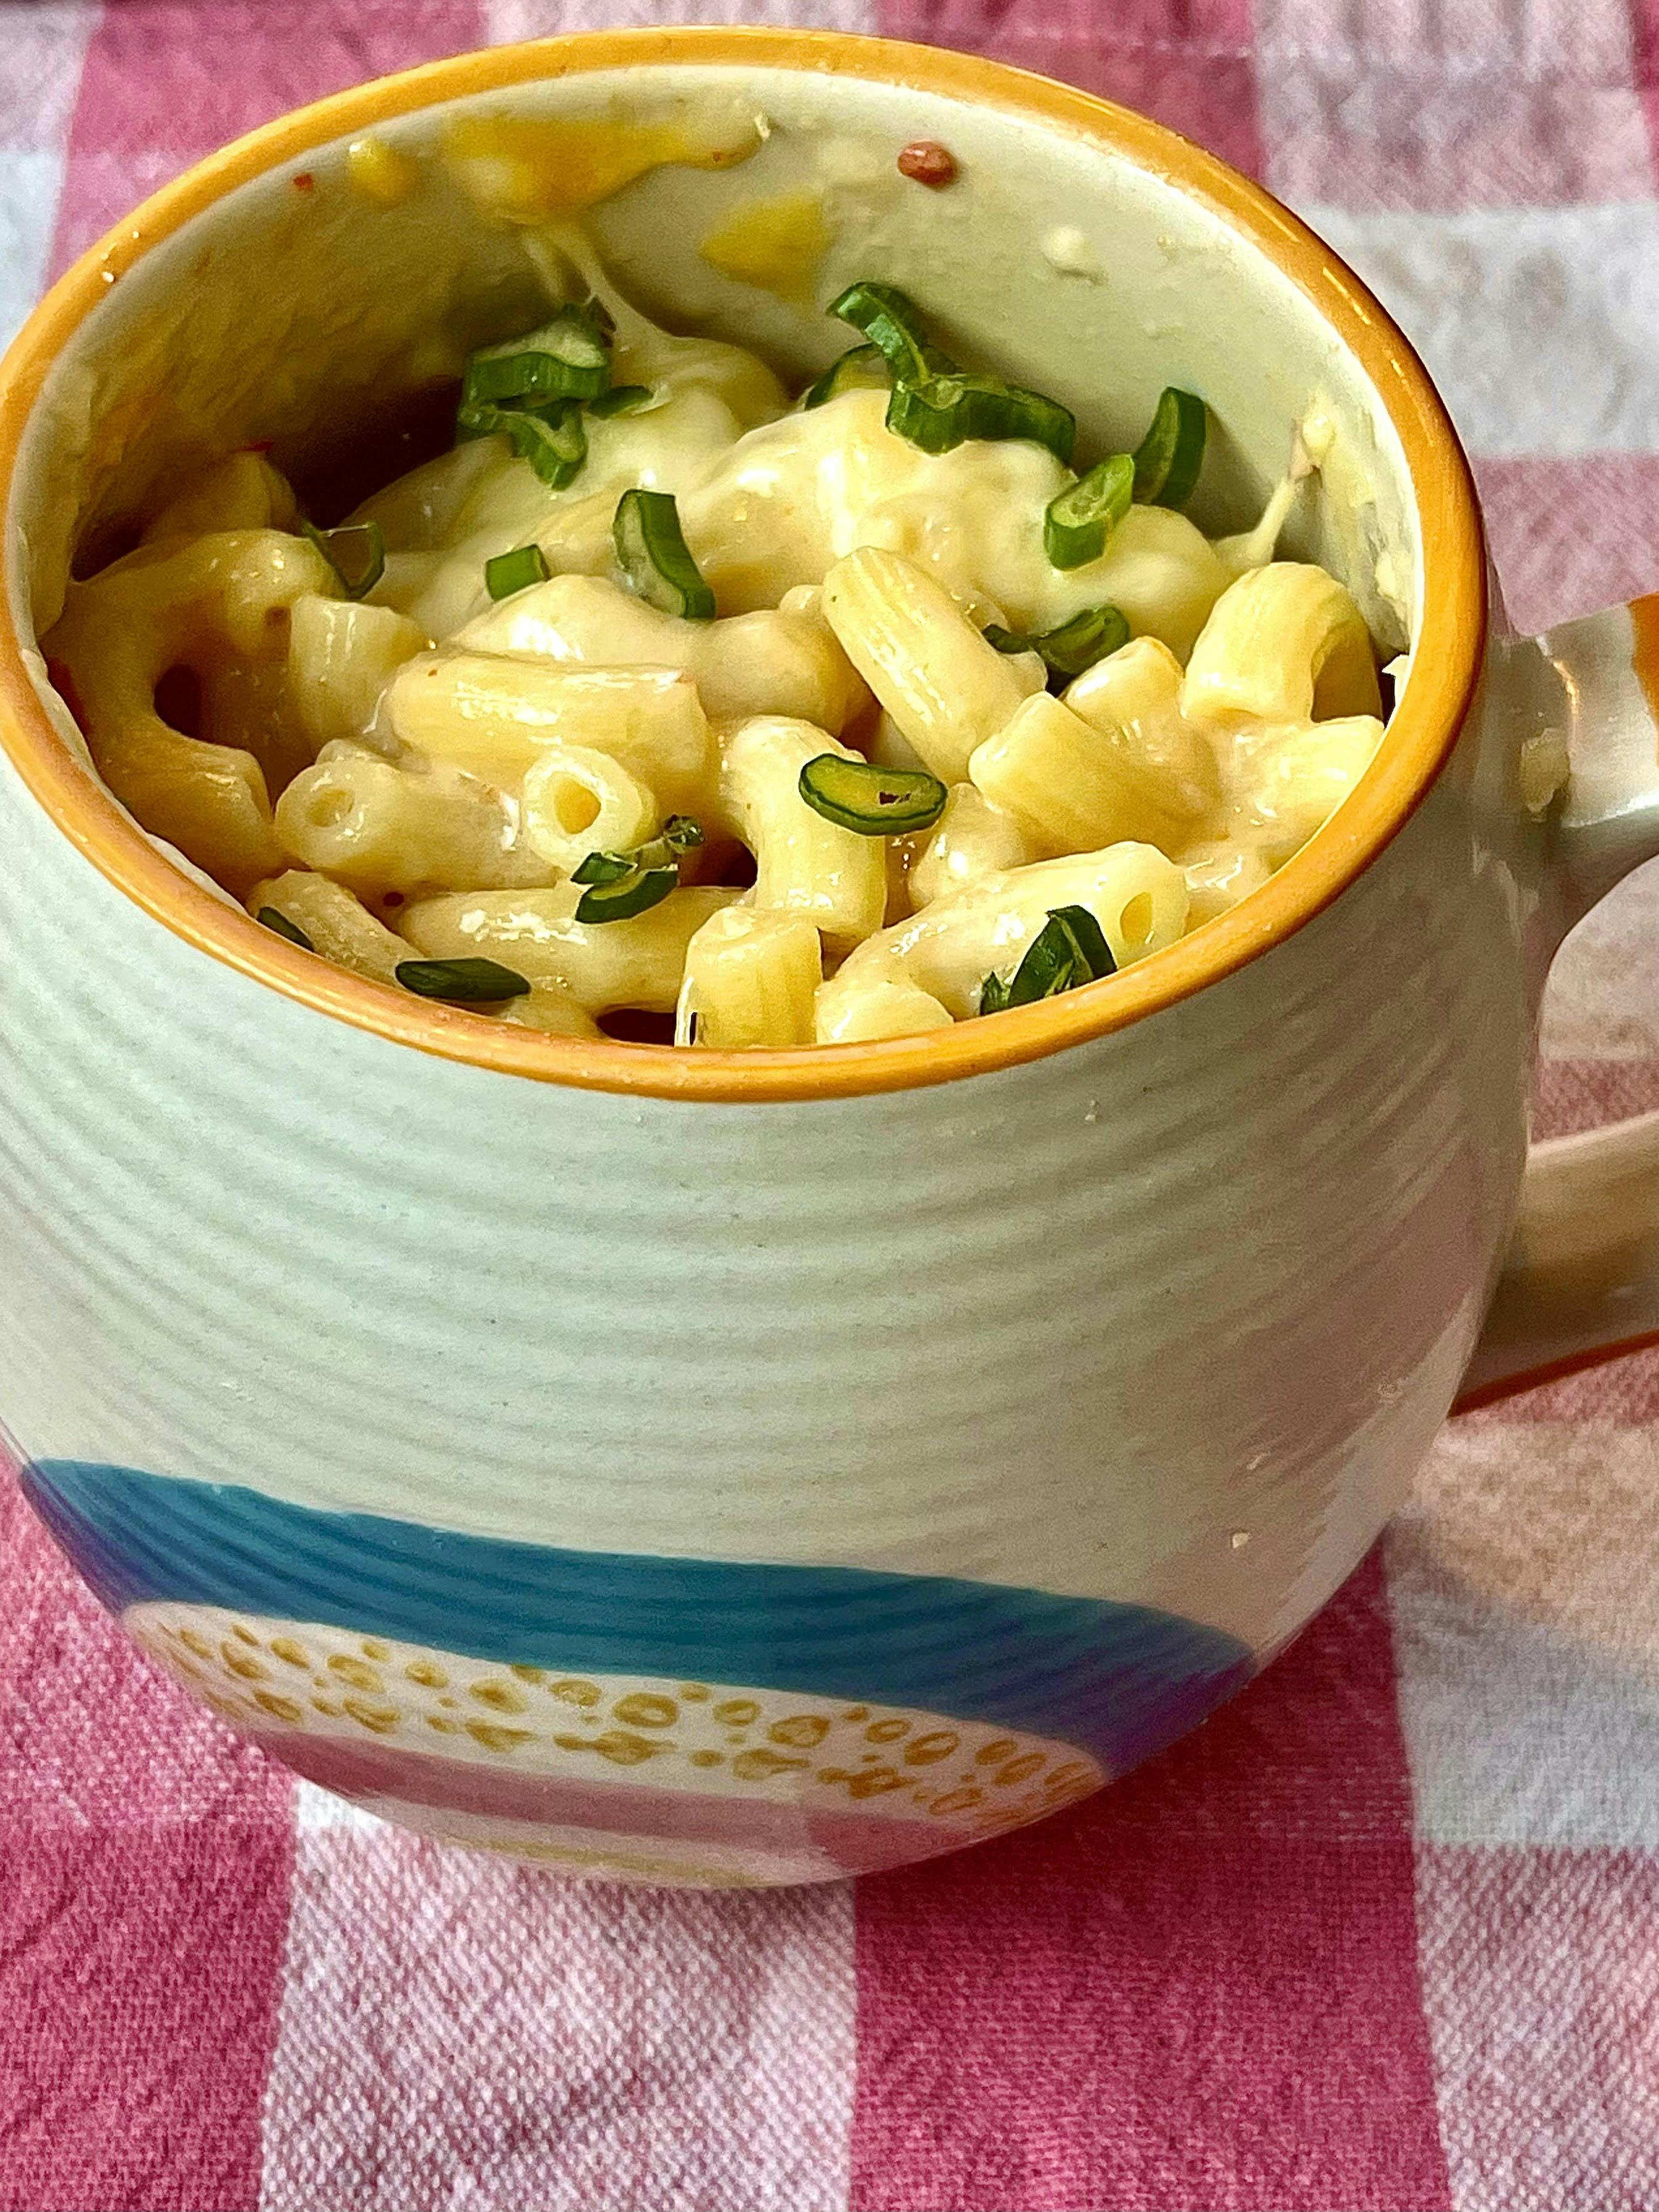 Picture for Mug Mac N ' Cheese ( XL portion)